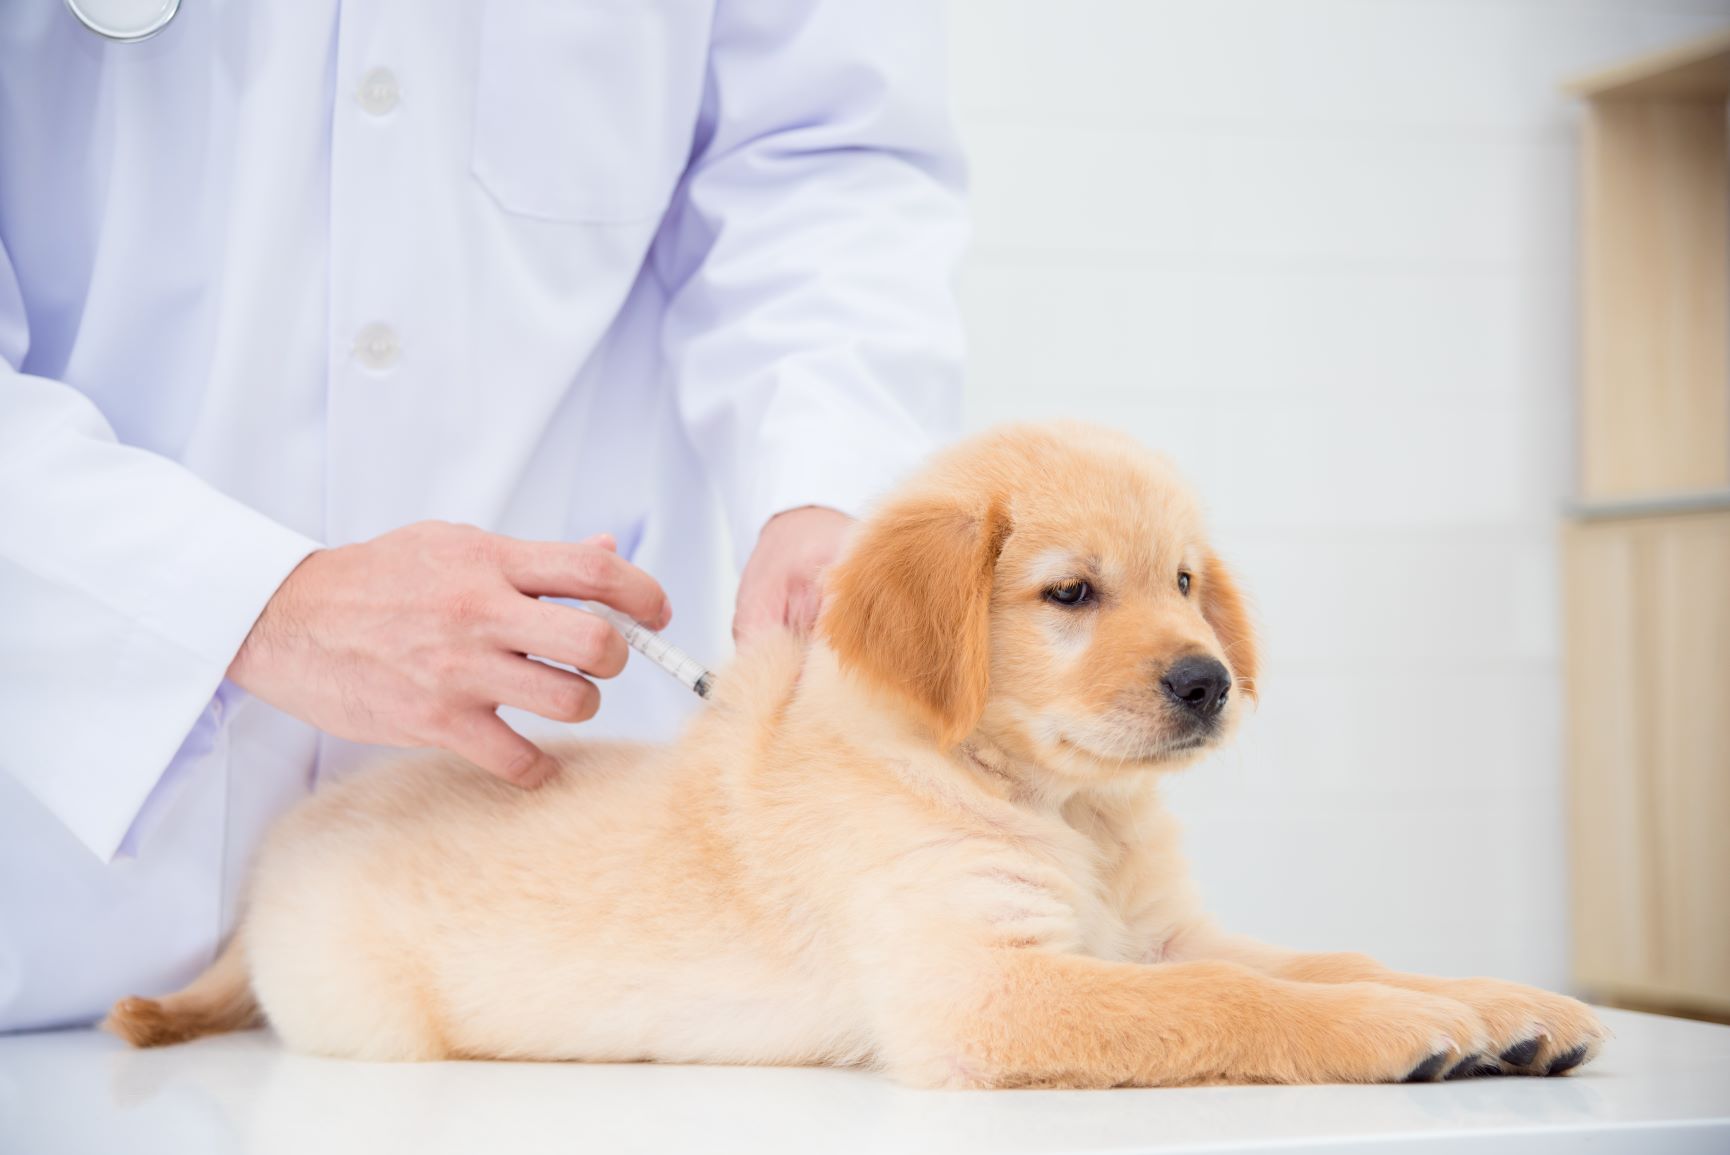 Vet giving a puppy a vaccination